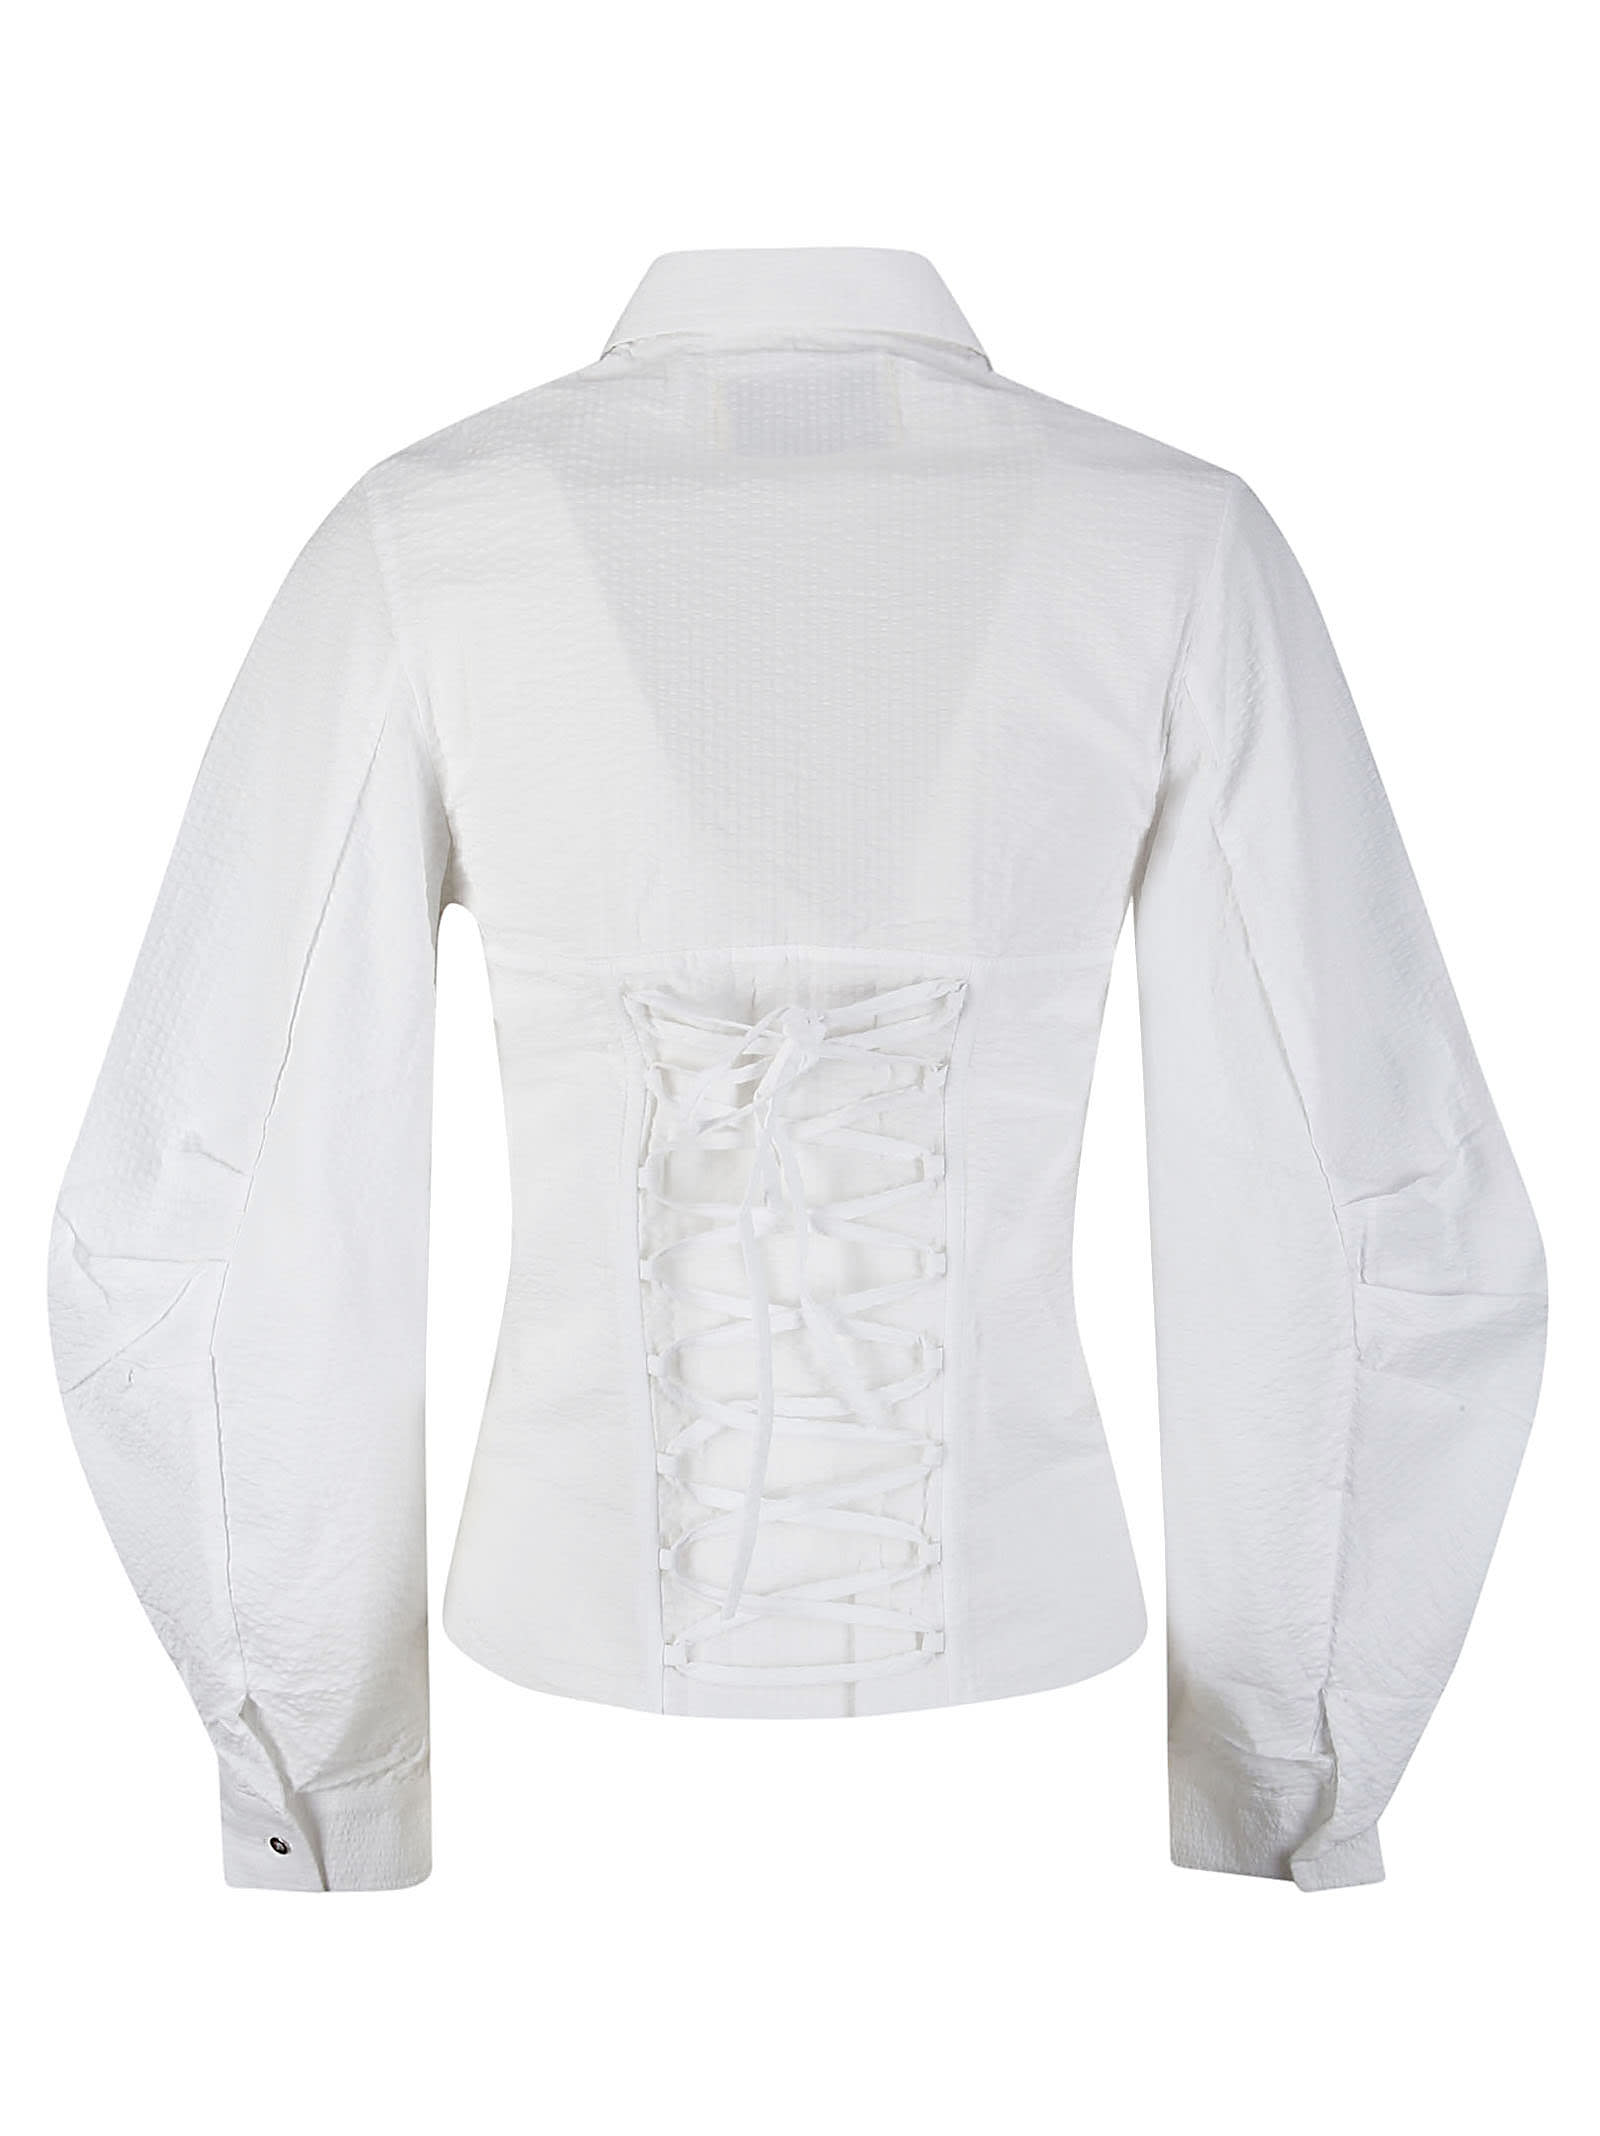 Marques'Almeida Corset Fitted Shirt | italist